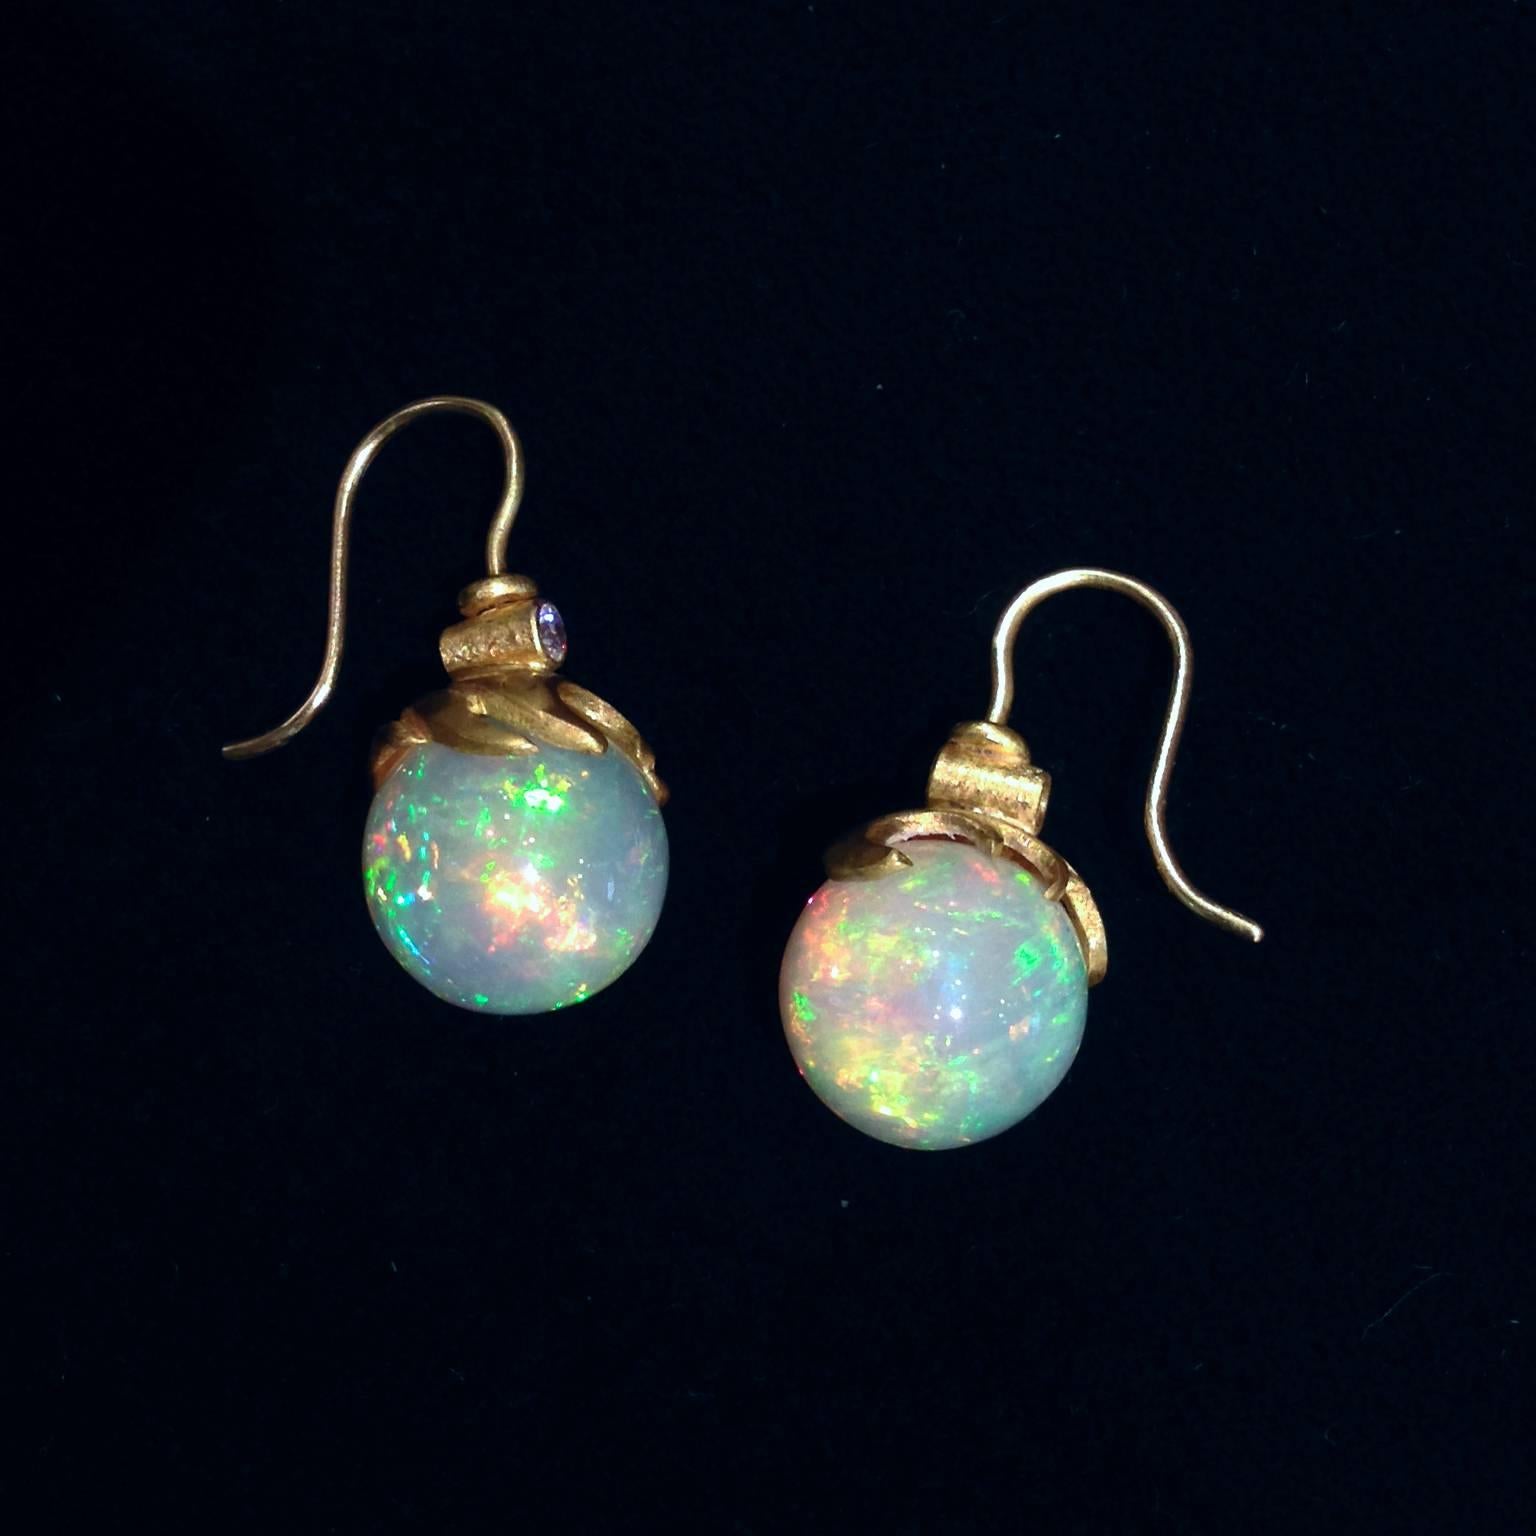 One-of-a-Kind Wave Earrings handcrafted by acclaimed jewelry artist Lilly Fitzgerald in matte finished 22k yellow gold. The earrings showcase two perfectly hand-carved white Ethiopian opal spheres with brilliant color-play featuring greens, blues,